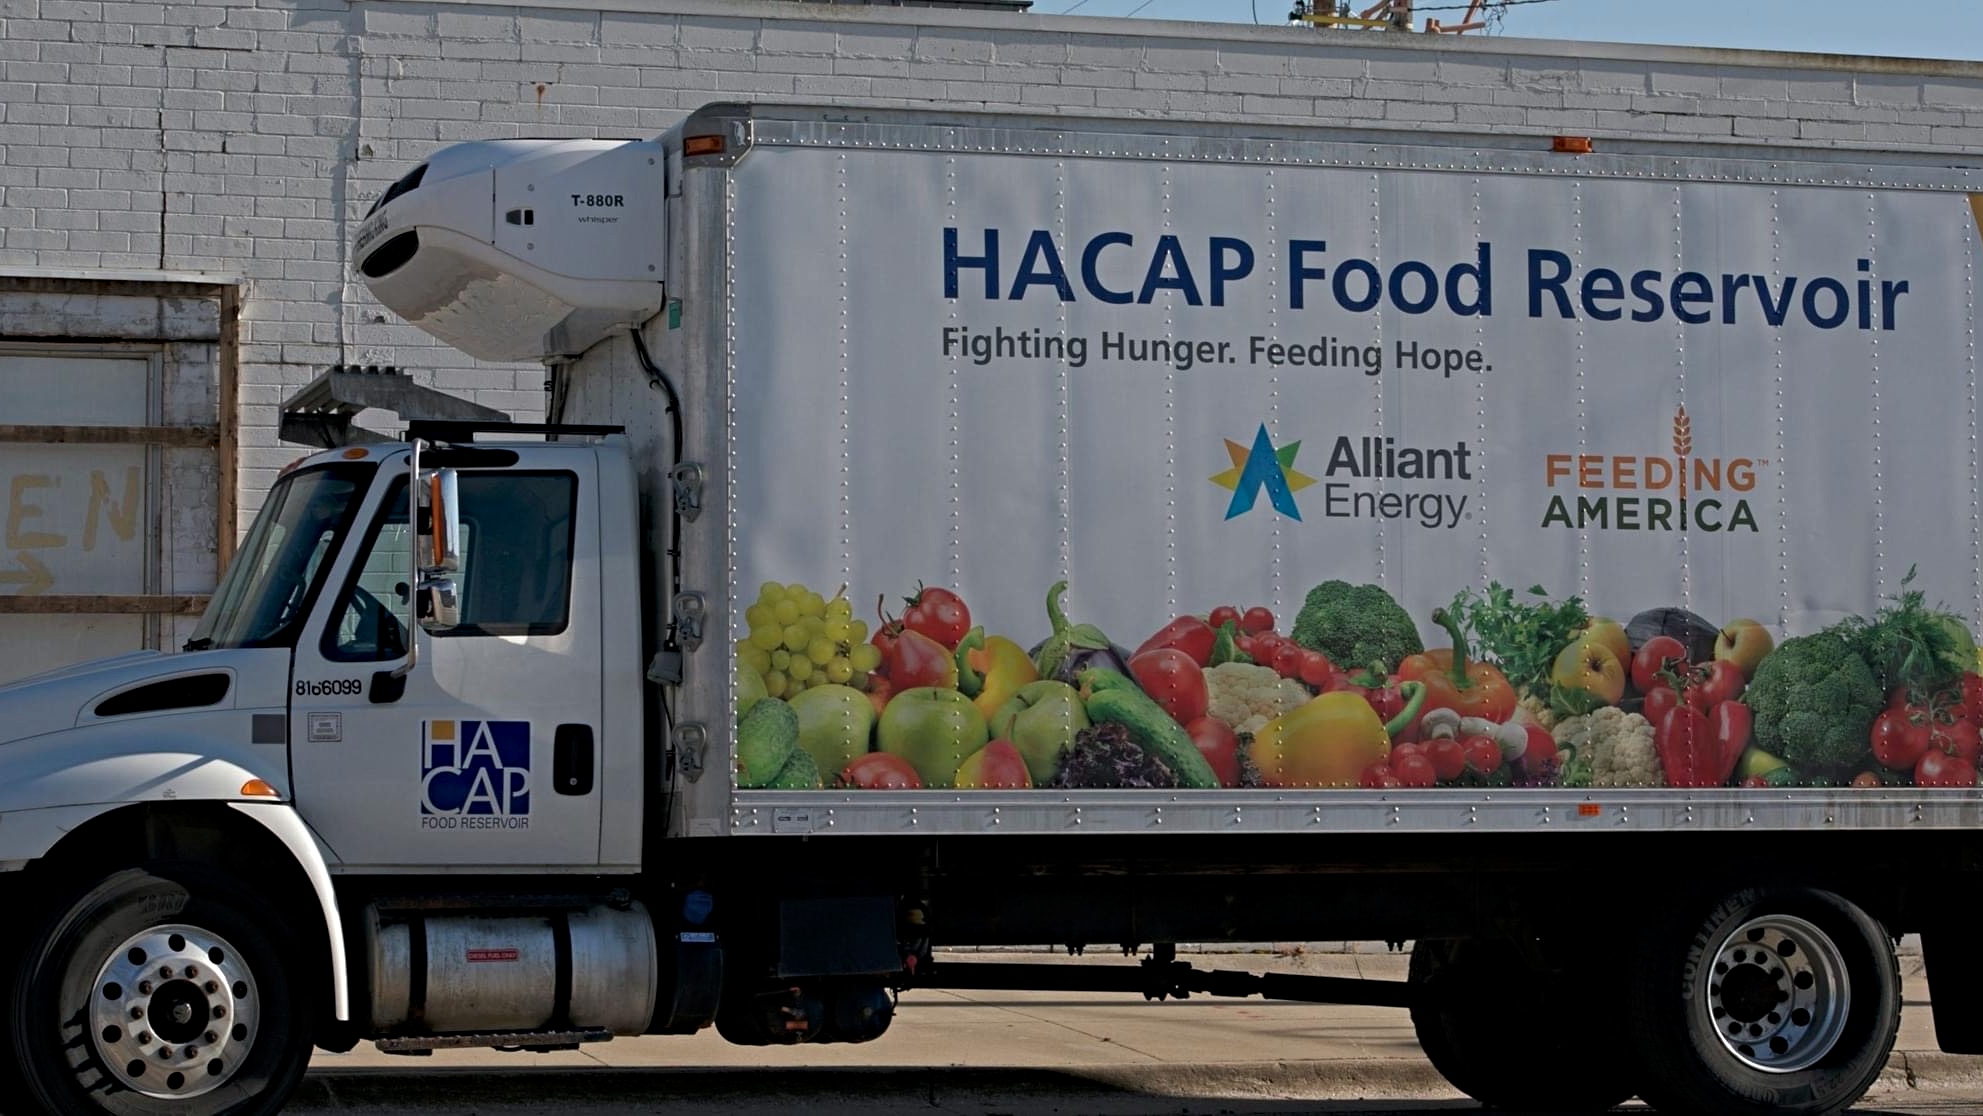 HACAP Food Reservoir truck completes a route to pick-up food that is on the verge of going bad from local retailers.